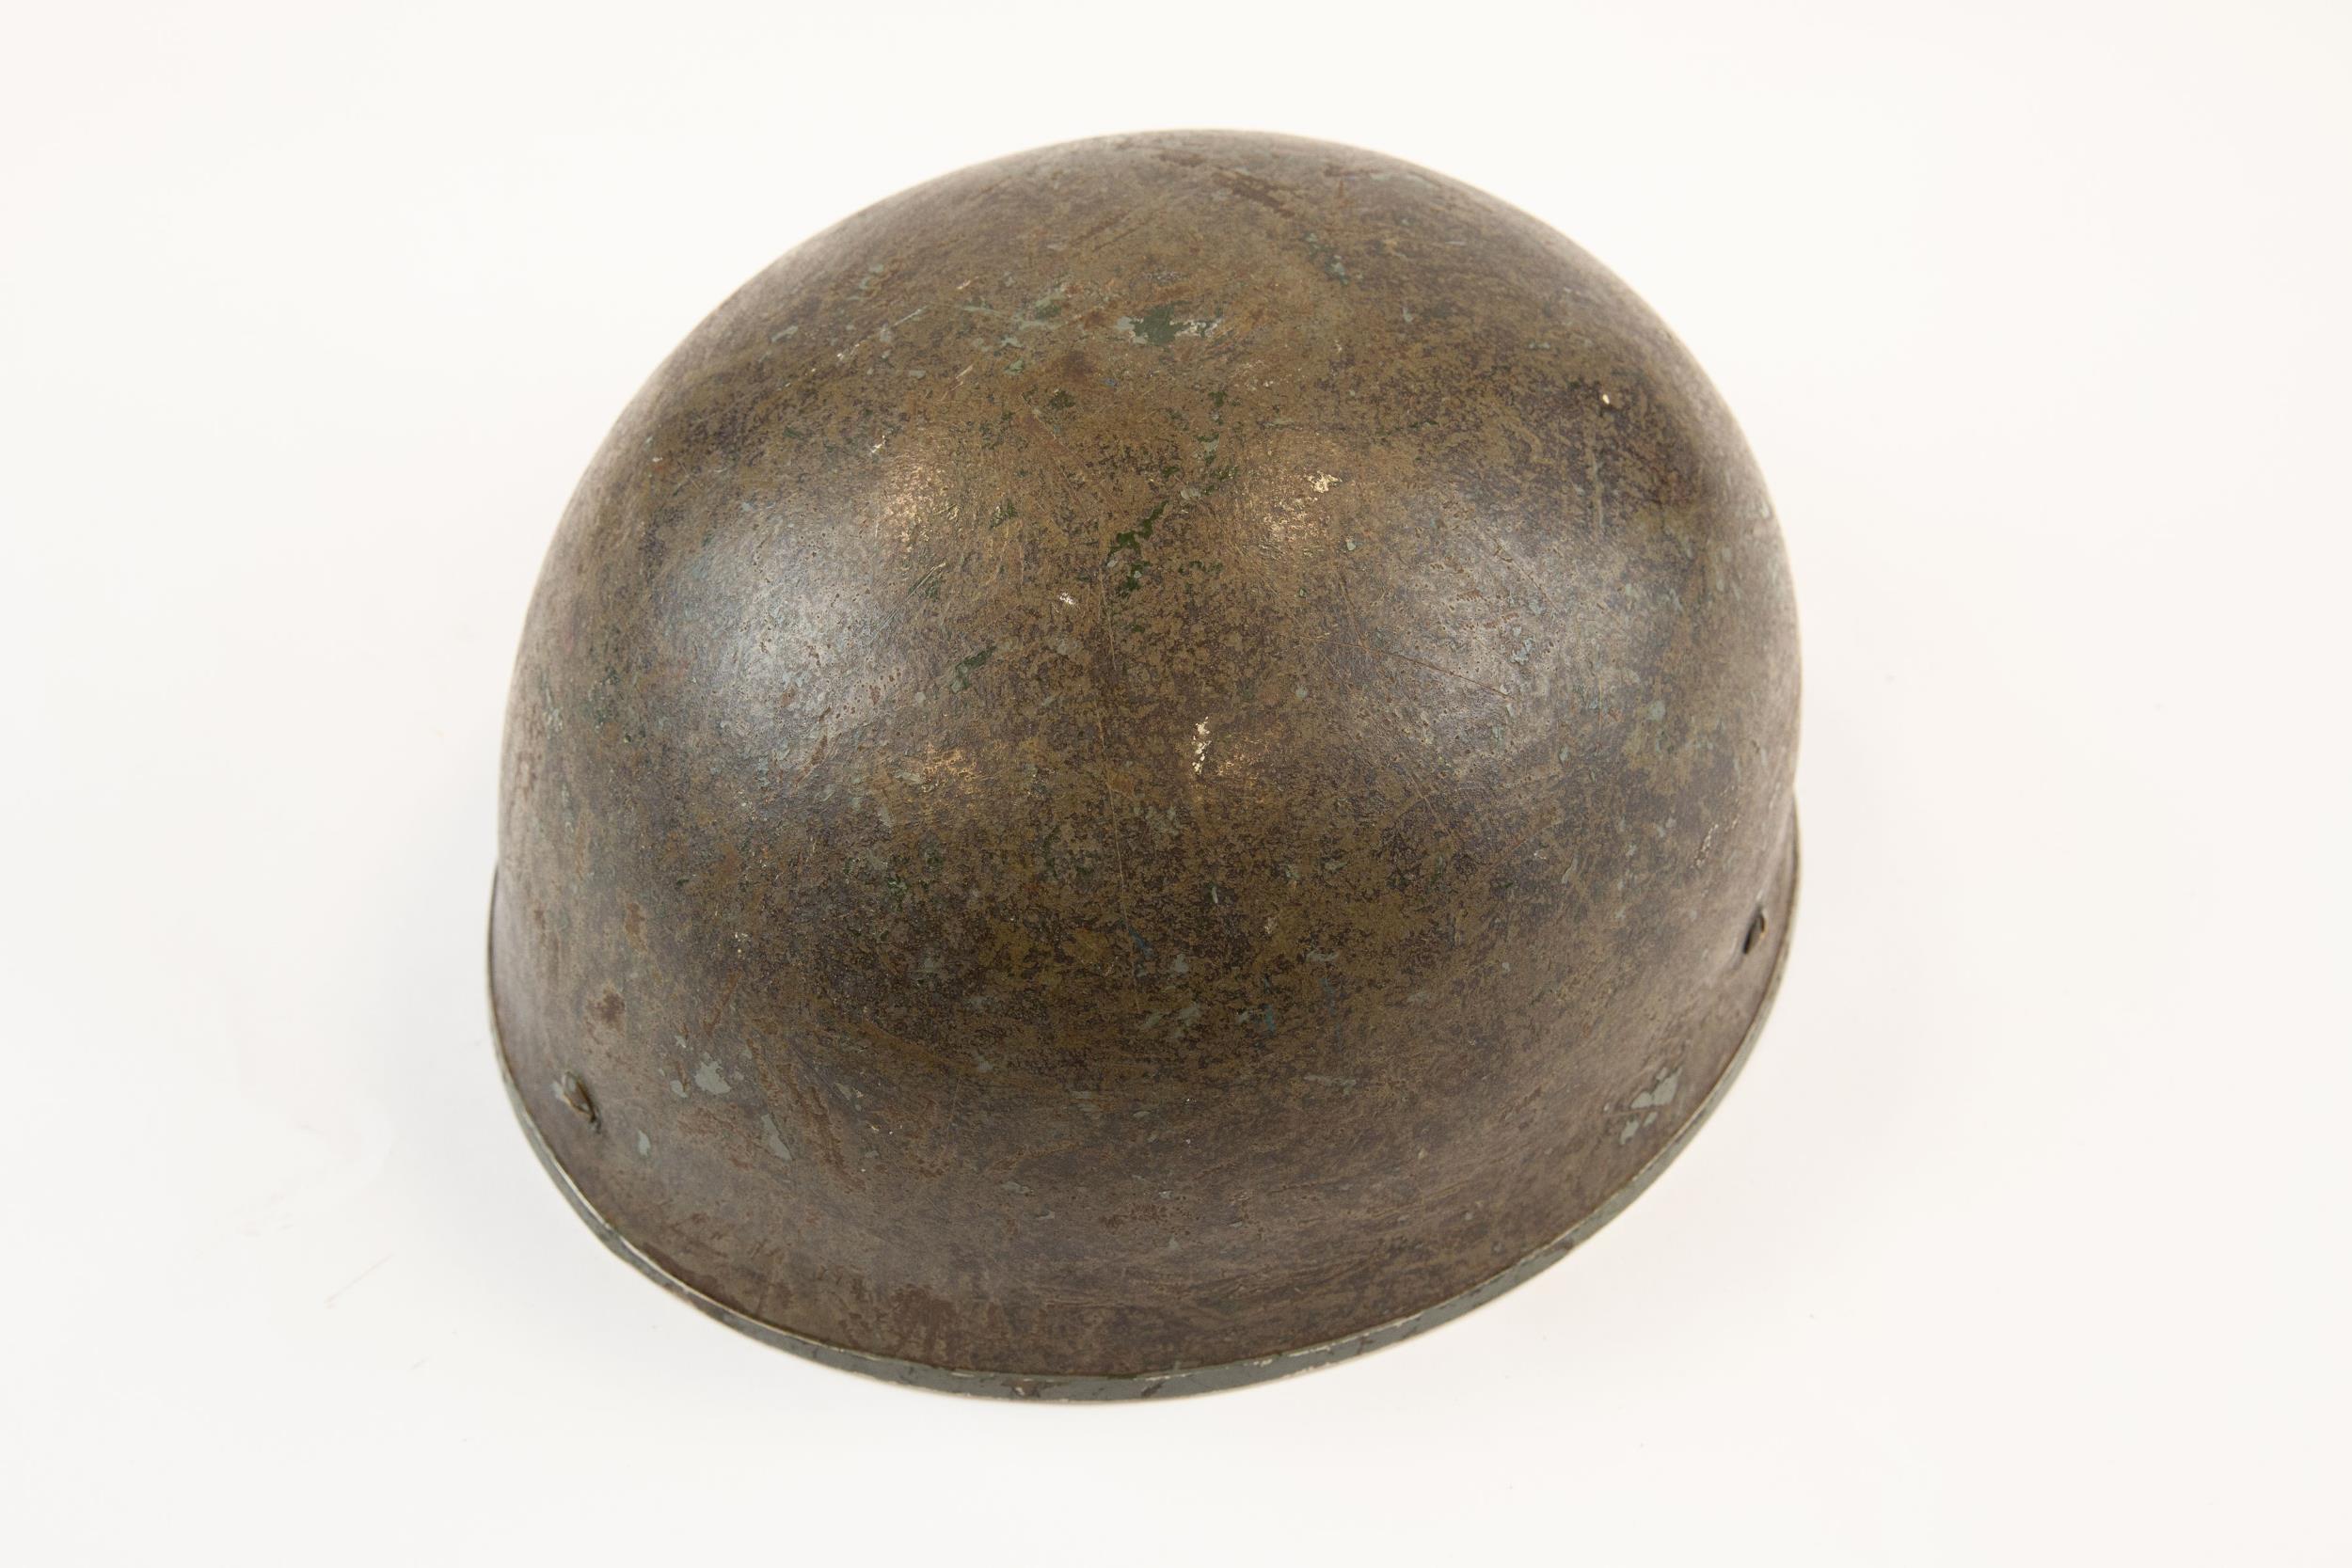 A British Parachutist's steel helmet, with foam padded liner and webbing chin strap and chin pad. GC